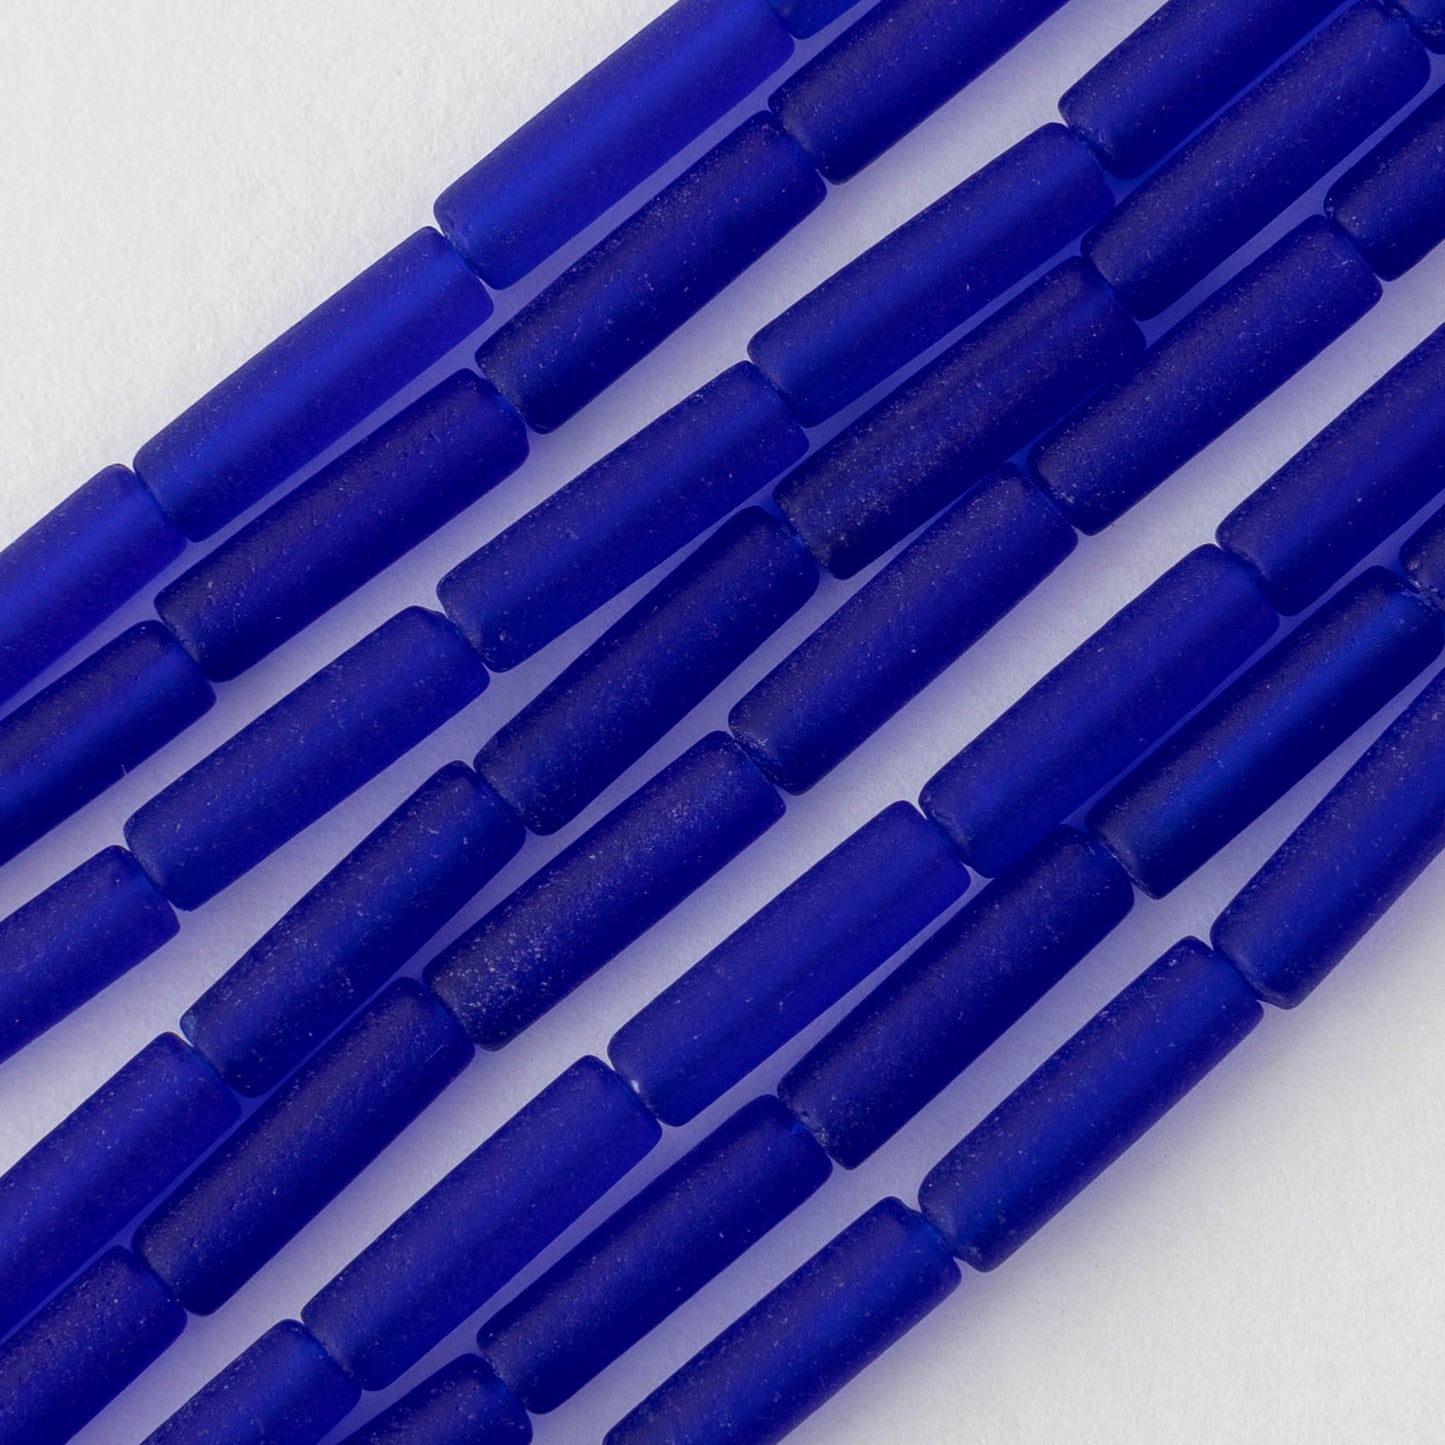 4x14mm Frosted Glass Tube Beads - Transparent Cobalt Blue - Choose Amount